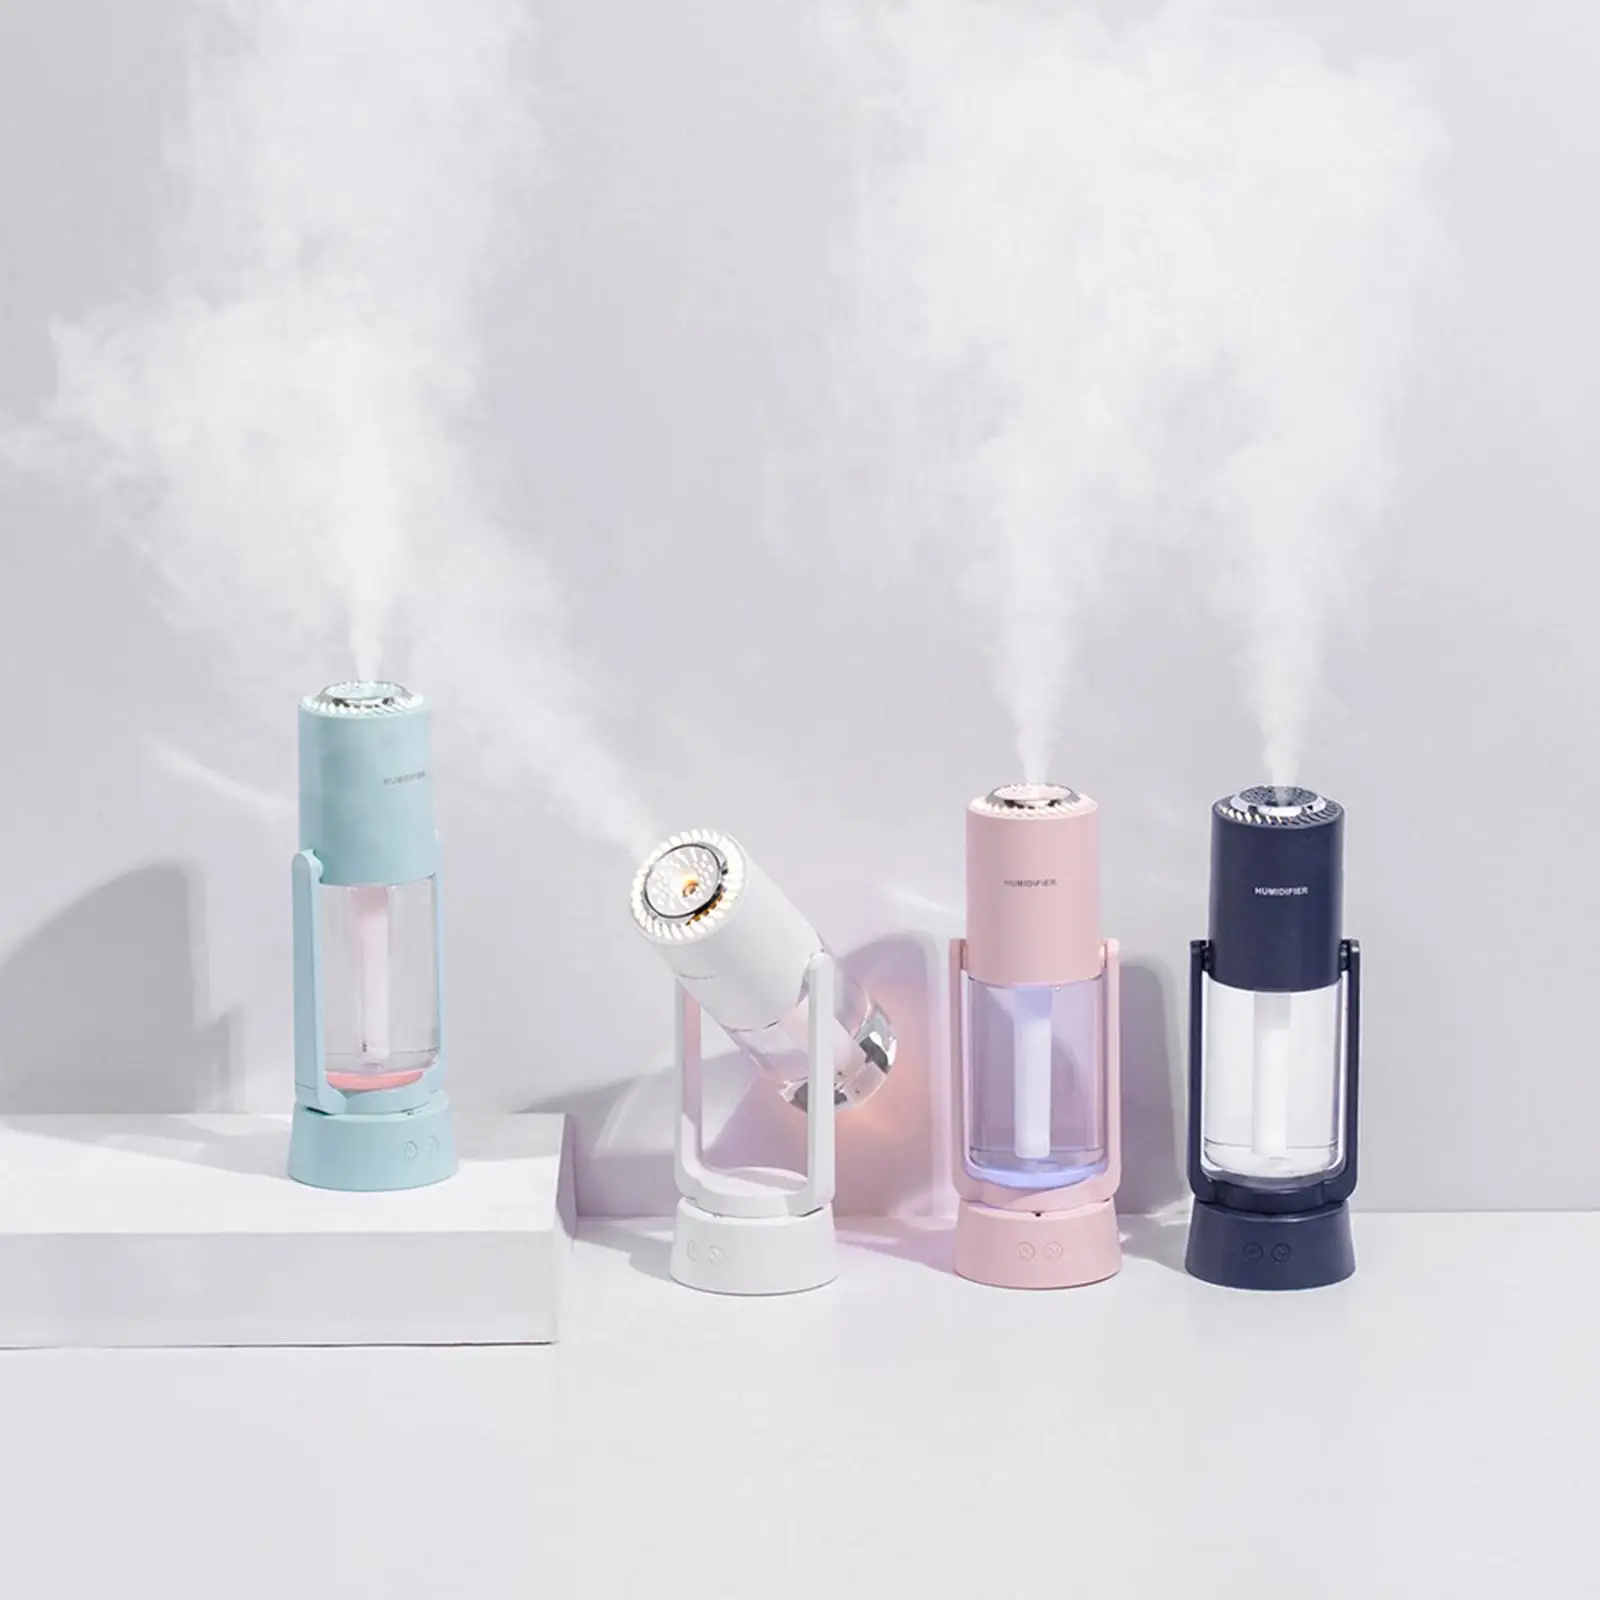 230ml Air Humidifier Fragrances Quiet LED Lights USB Charging 120 180 Rotary Essential Oil Diffusers for Bedroom Yoga Desktop